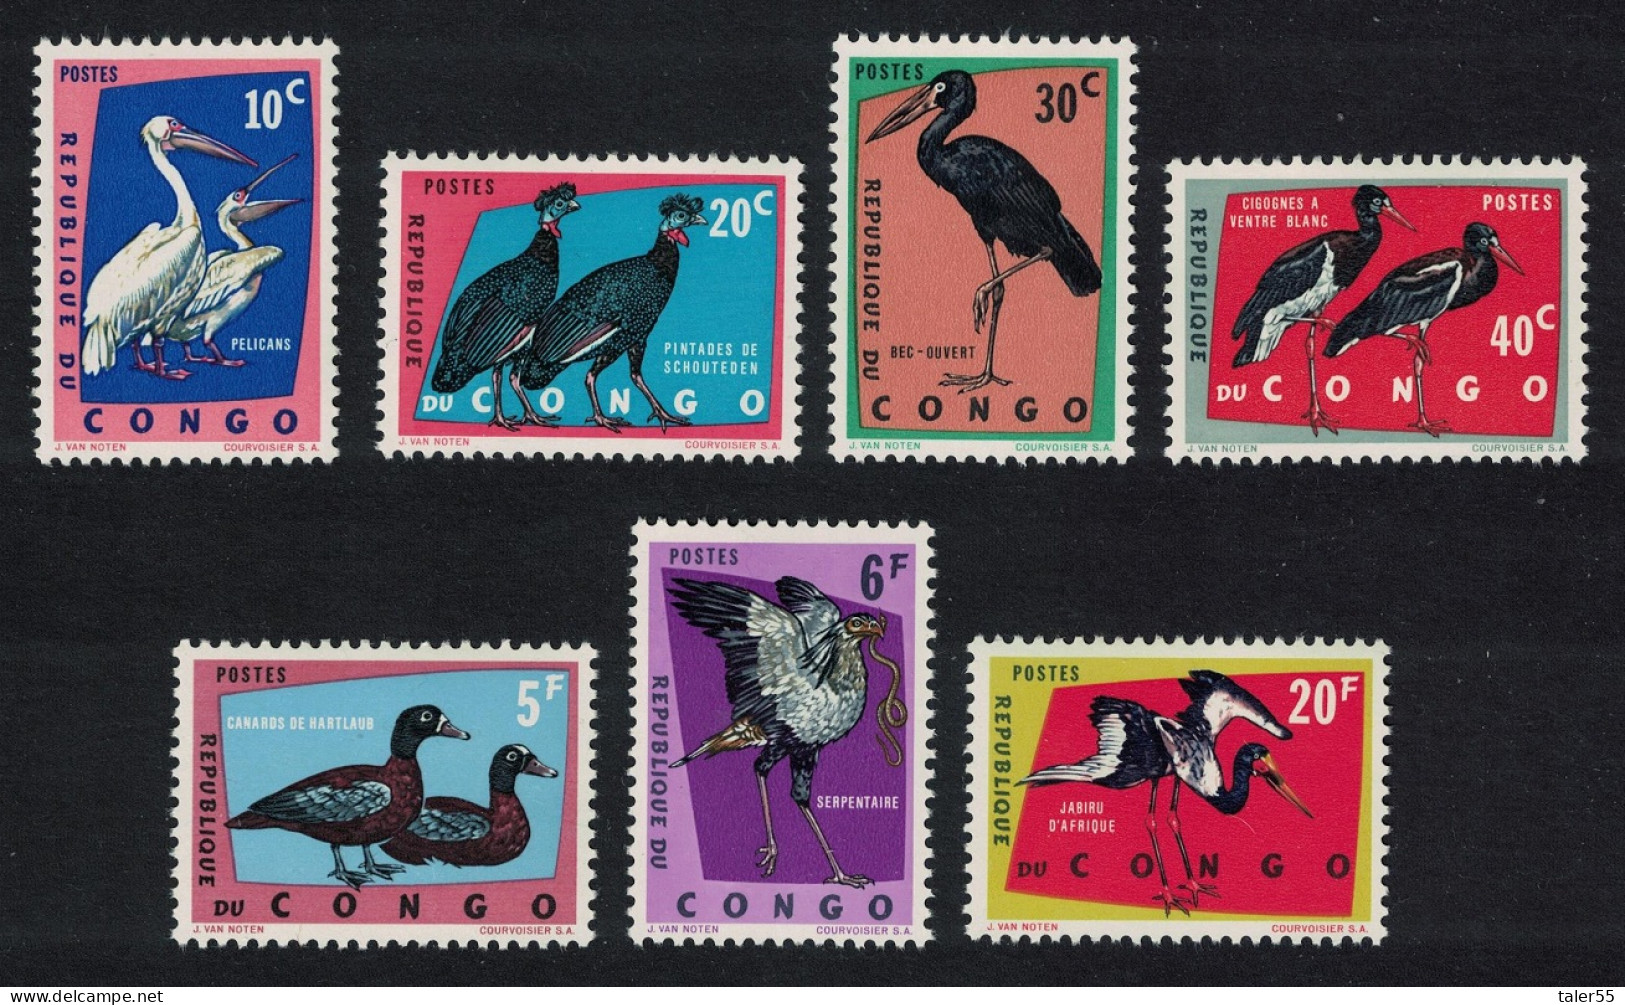 DR Congo Protected Birds 7v 2nd Part Of The Issue 1963 MNH SG#472=481 MI#138-144 Sc#429-442 - Mint/hinged